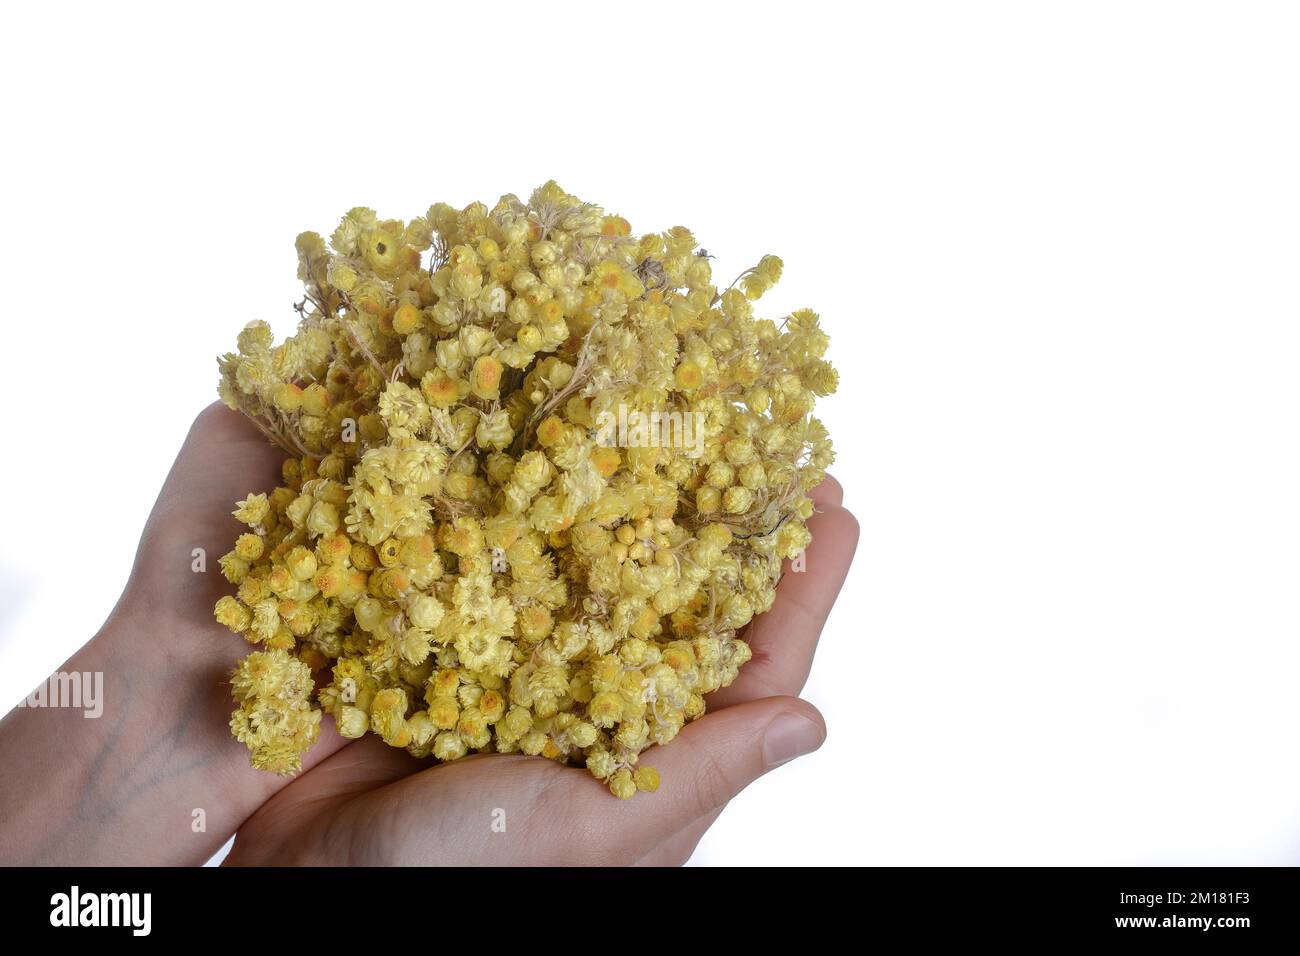 Child holding a bunch of dry yellow flowers in hand Stock Photo